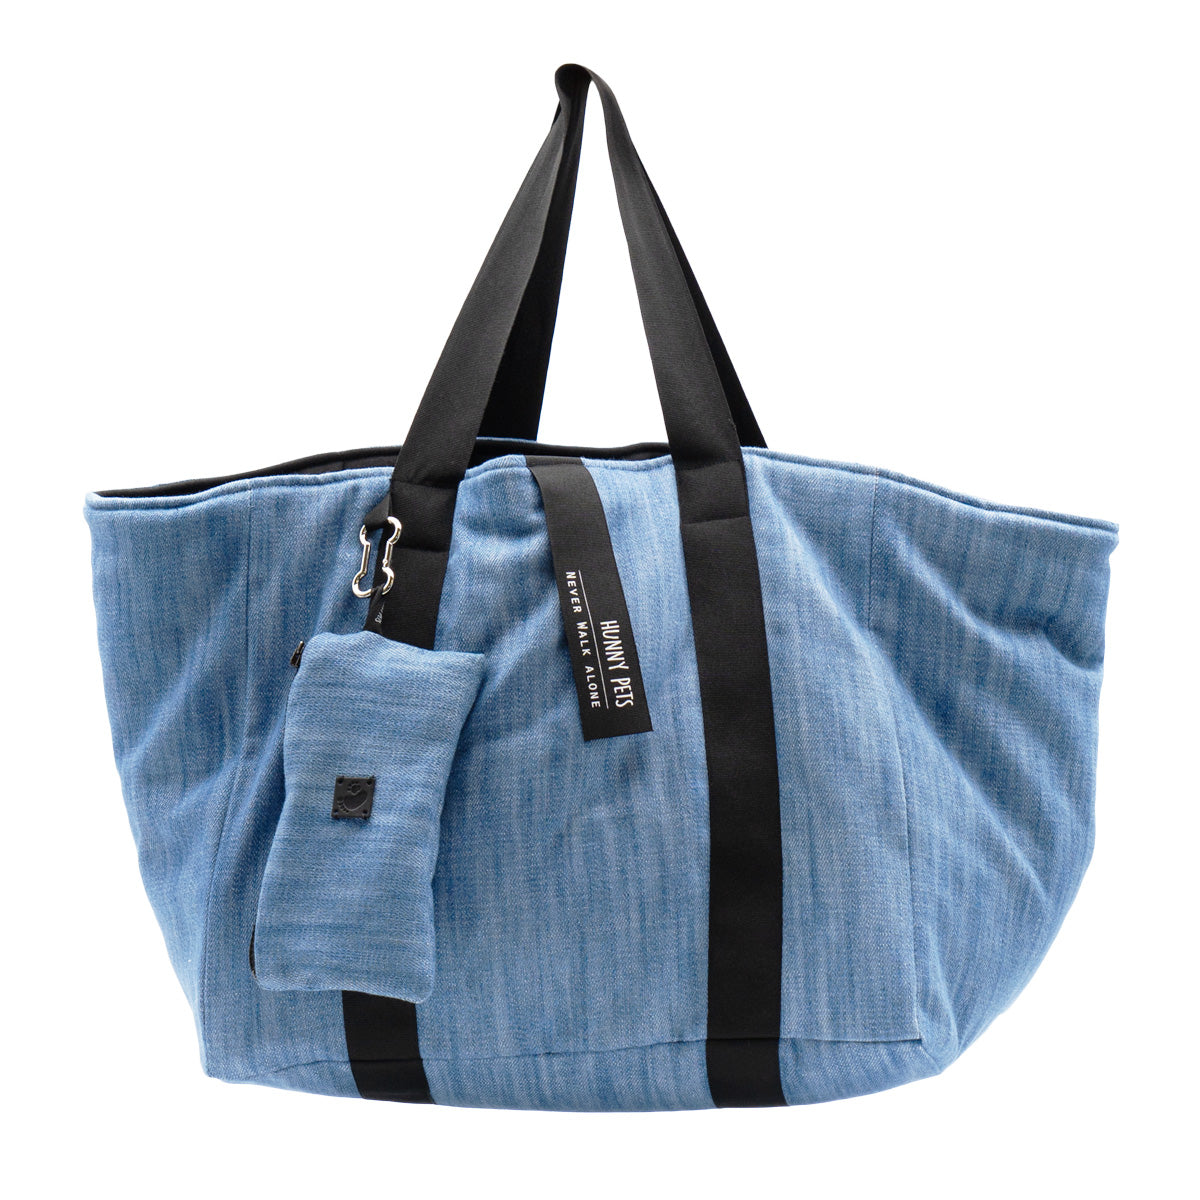 Dog kennel bag | Jeans and inner sweatshirt | Dandy's Store